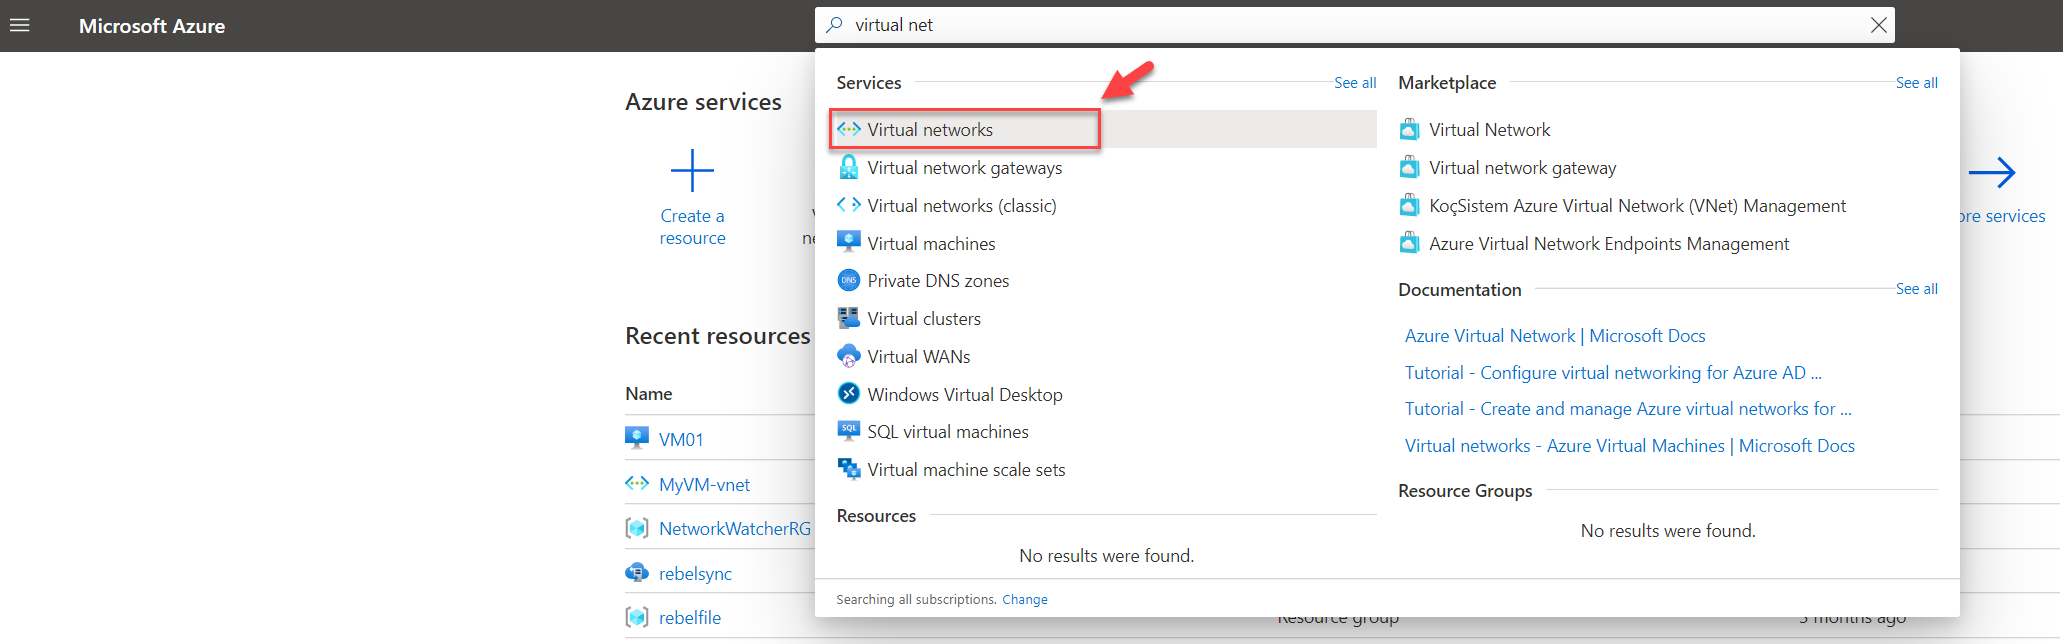 Search for Azure Virtual Network Resources